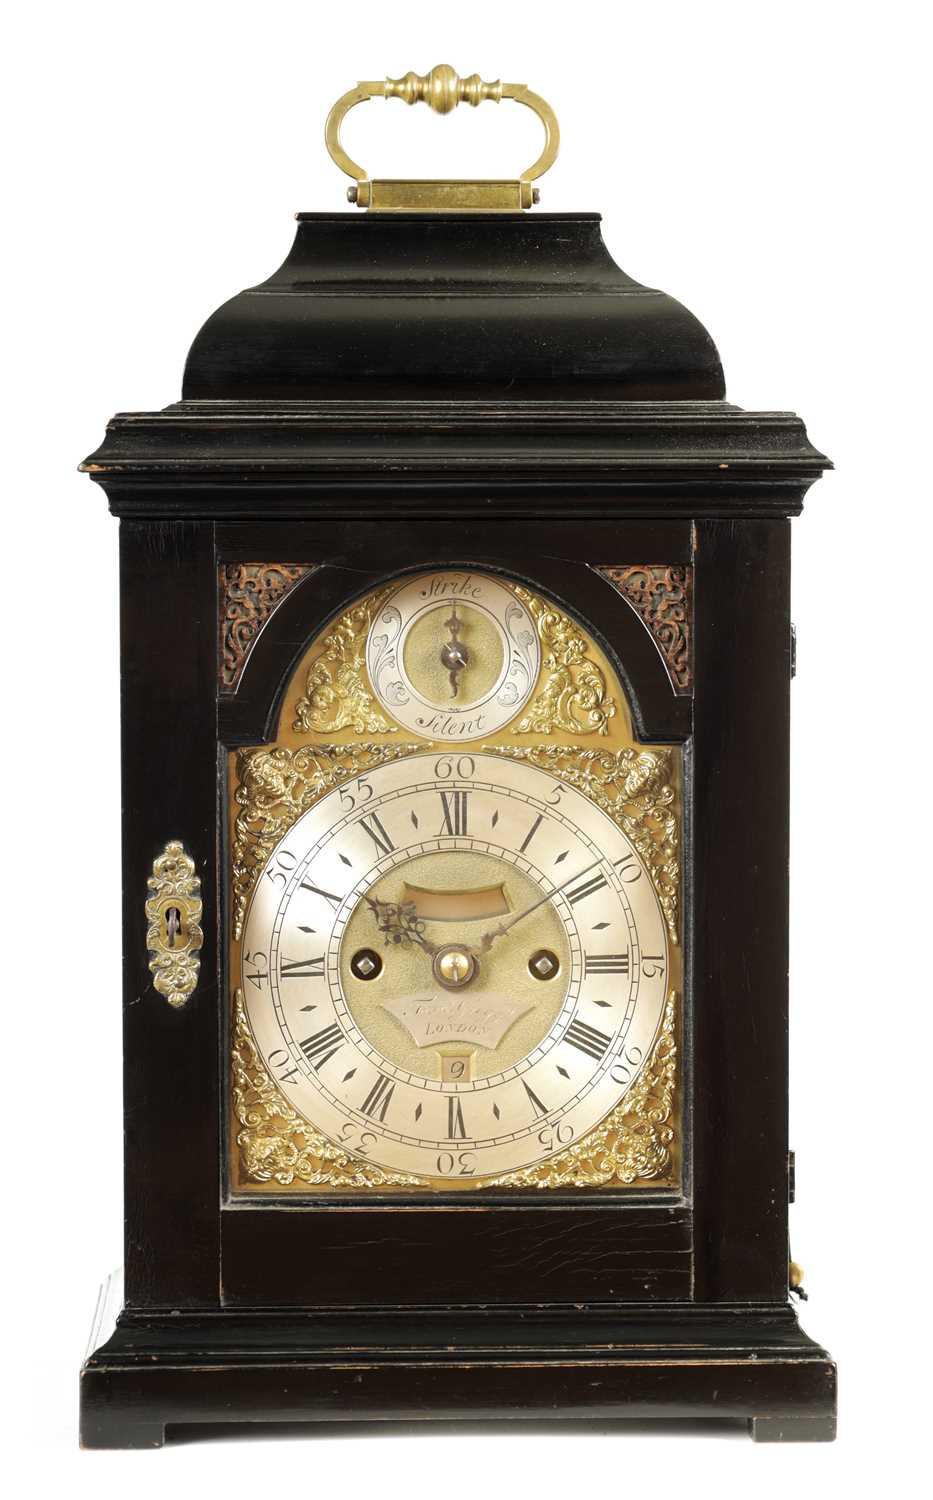 Lot 20 - FRANCIS GREGG, LONDON. A GEORGE I EBONISED QUARTER REPEATING BRACKET CLOCK OF SMALL PROPORTIONS